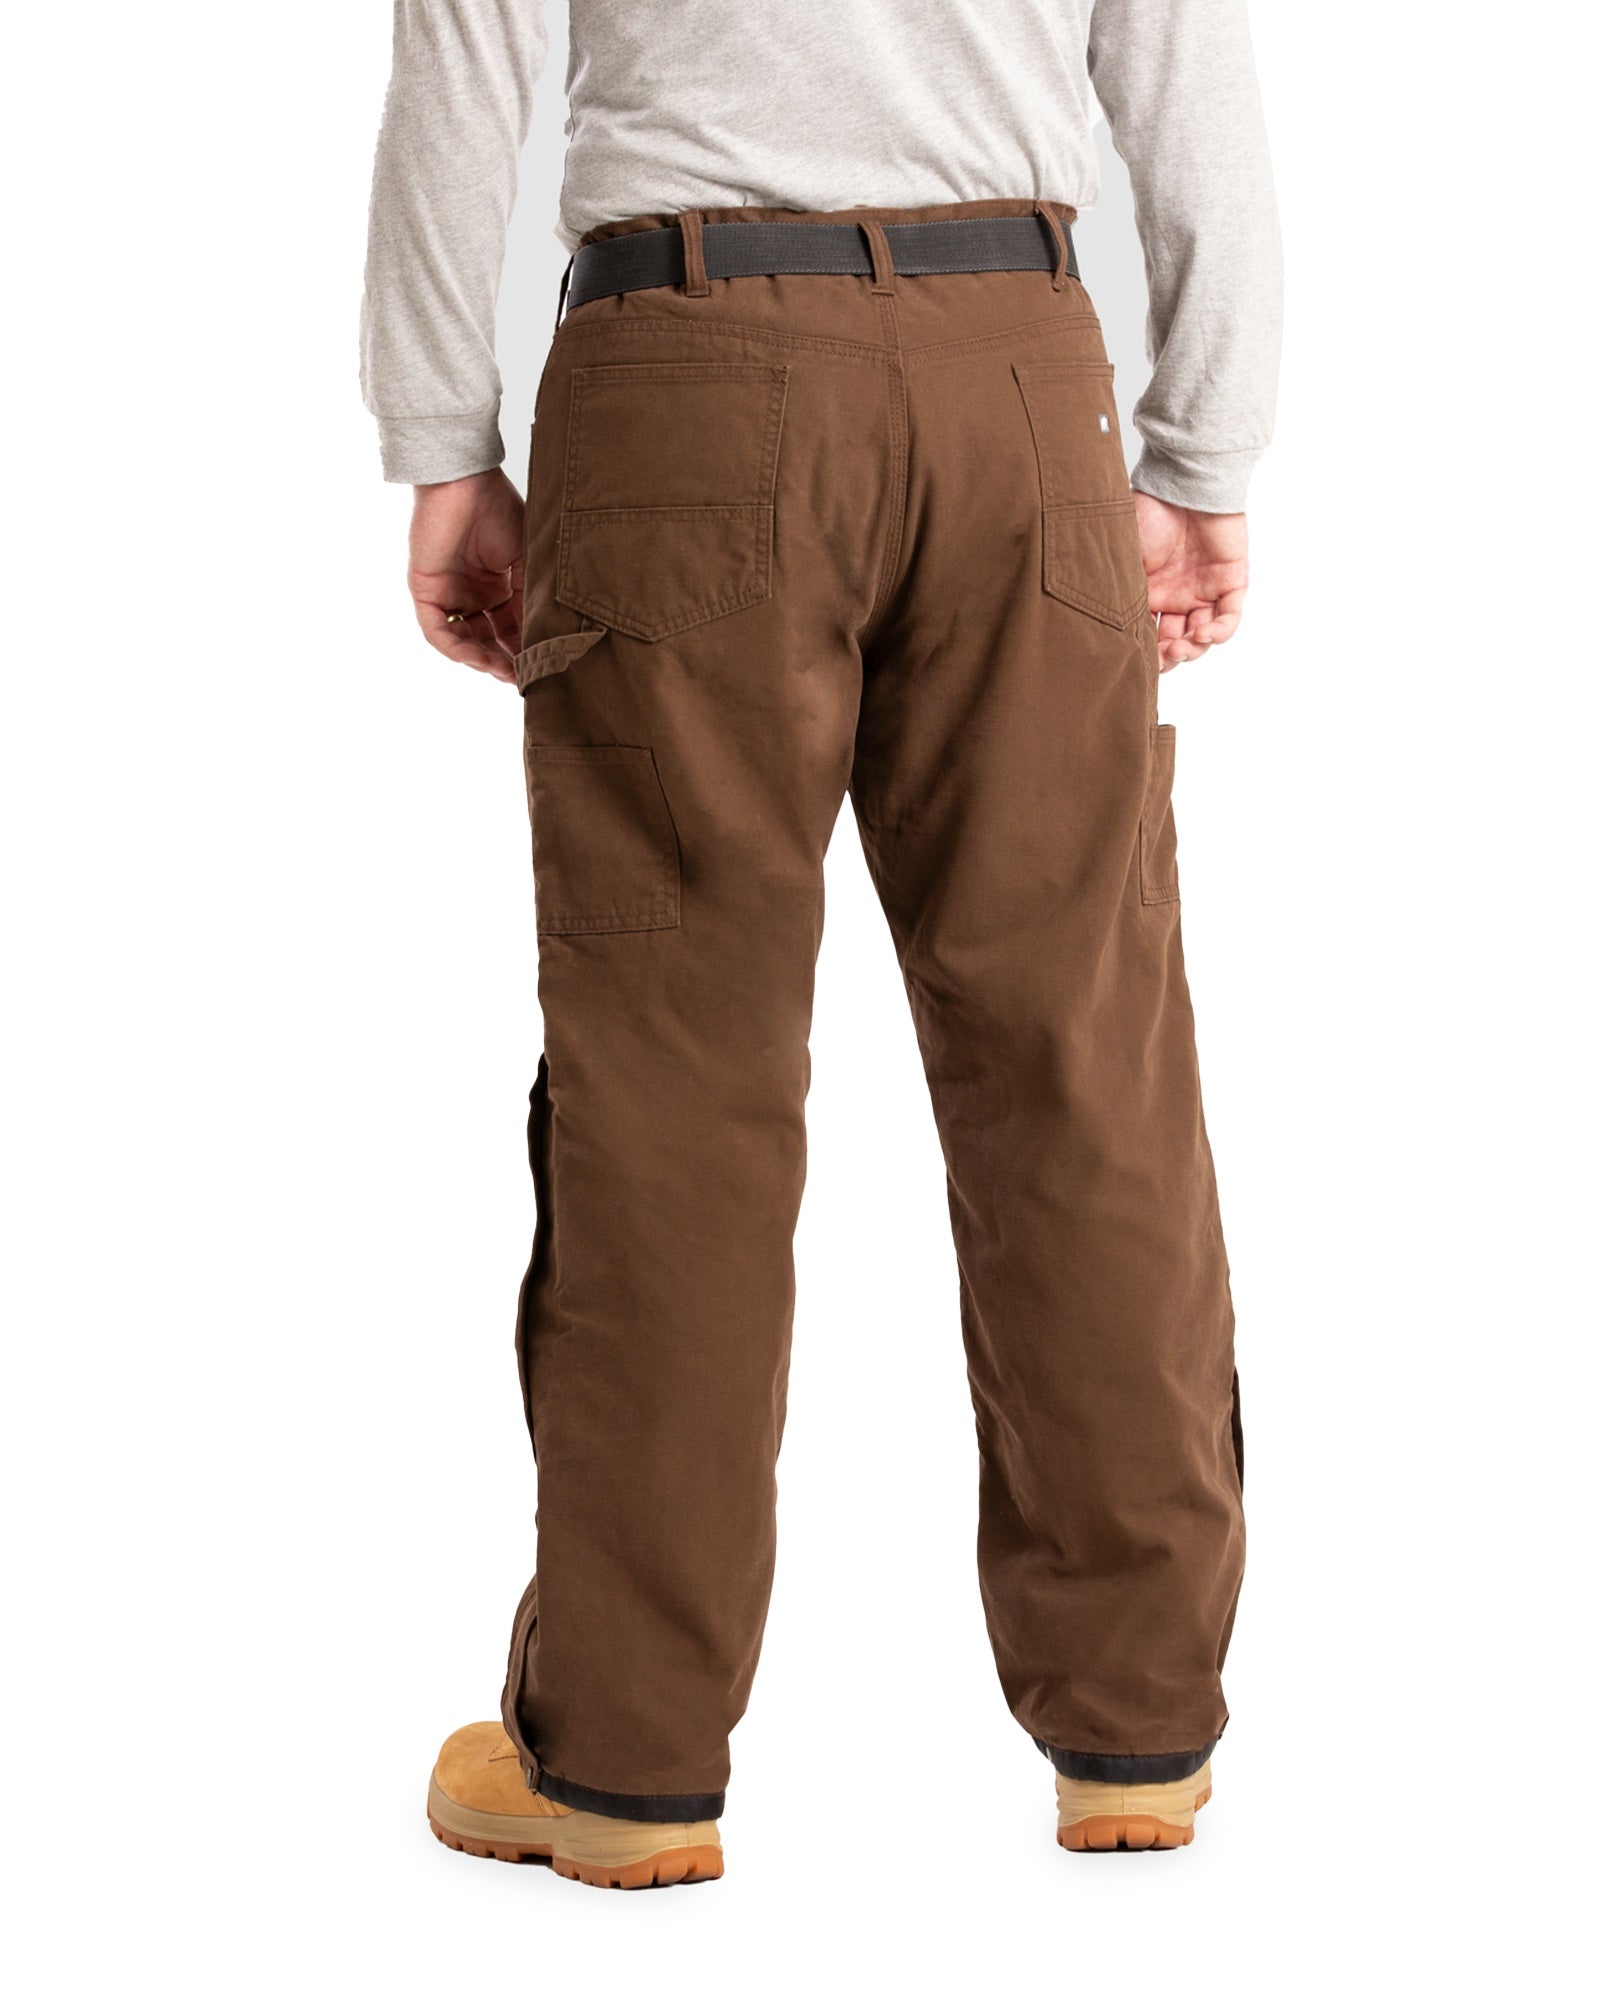 Men's Washed Duck Insulated Outer Pant